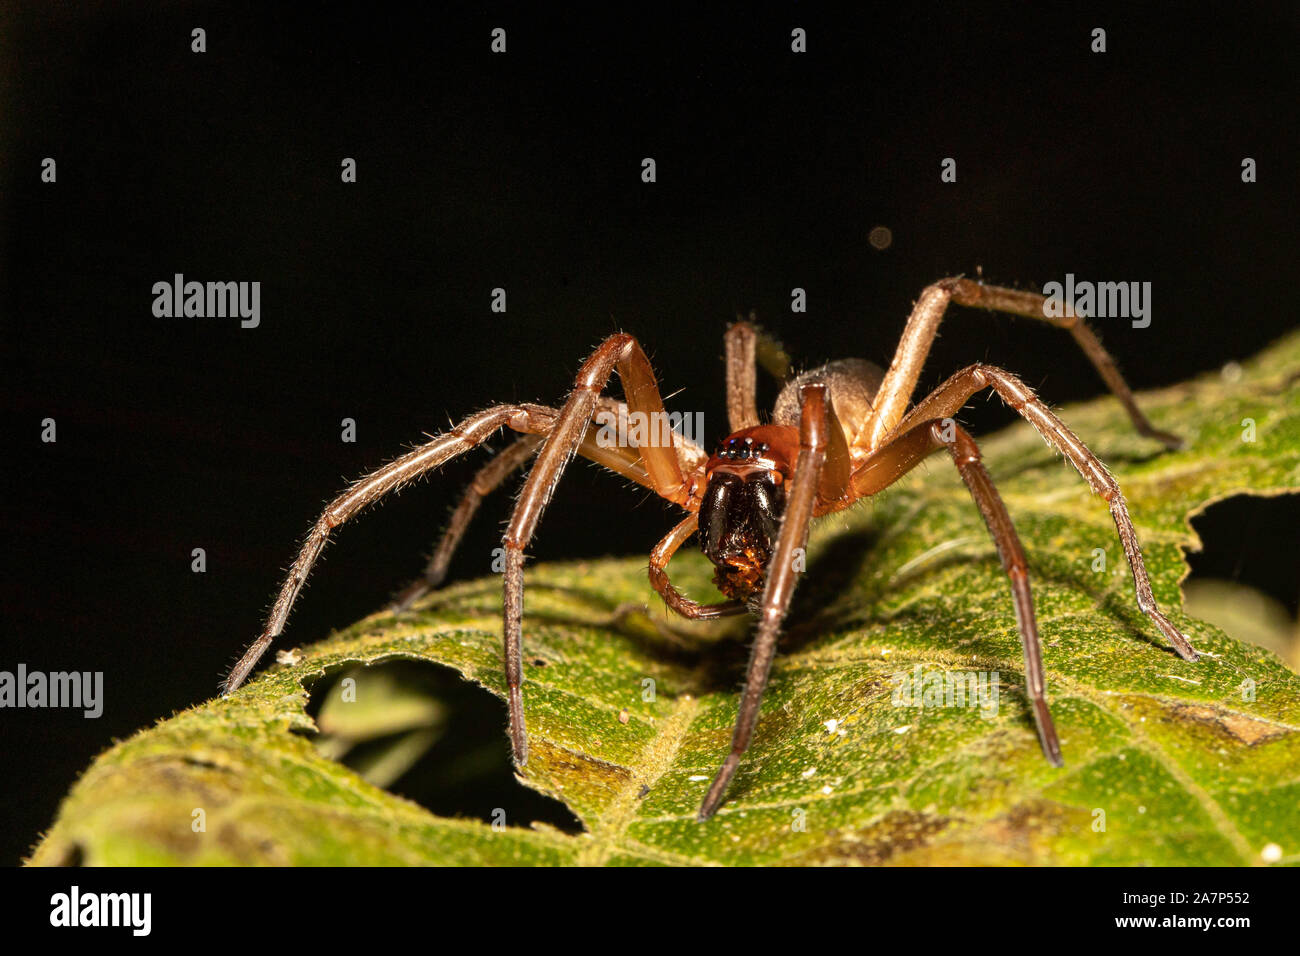 Spider consuming an insect in the jungle near Sao Paulo, Brazil Stock Photo